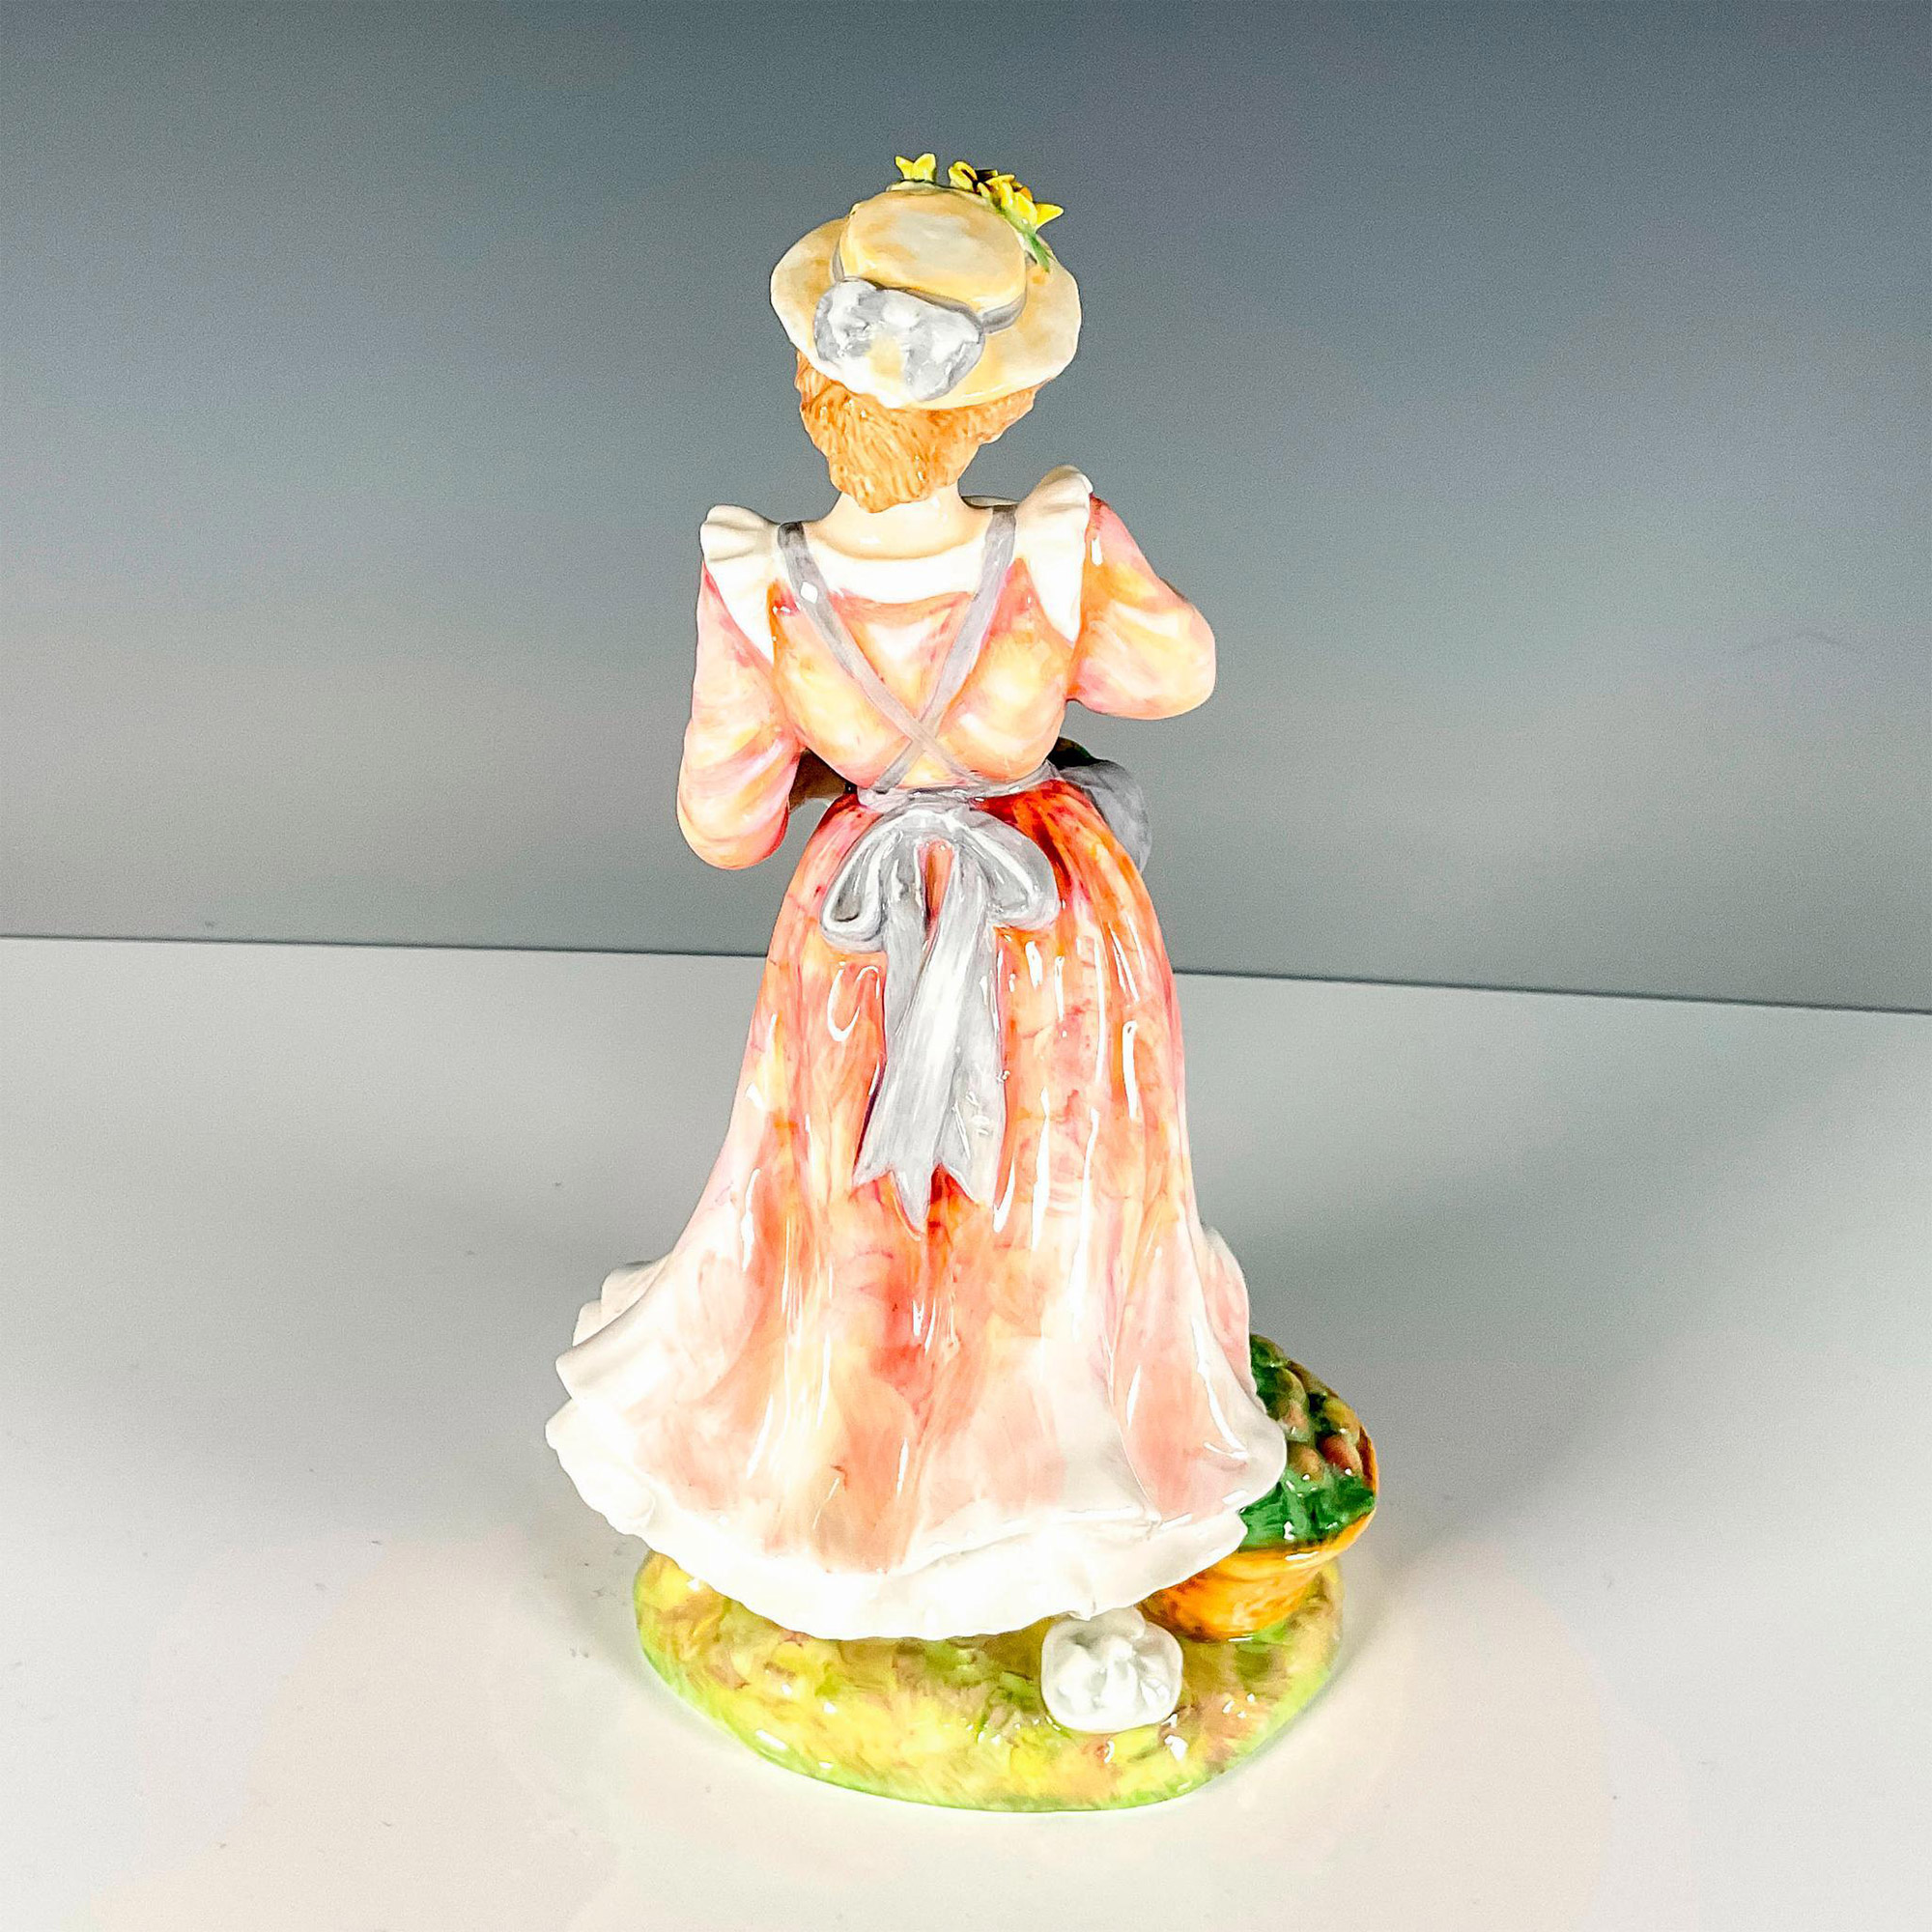 Country Love - HN2418 - Royal Doulton Figurine - Image 2 of 3